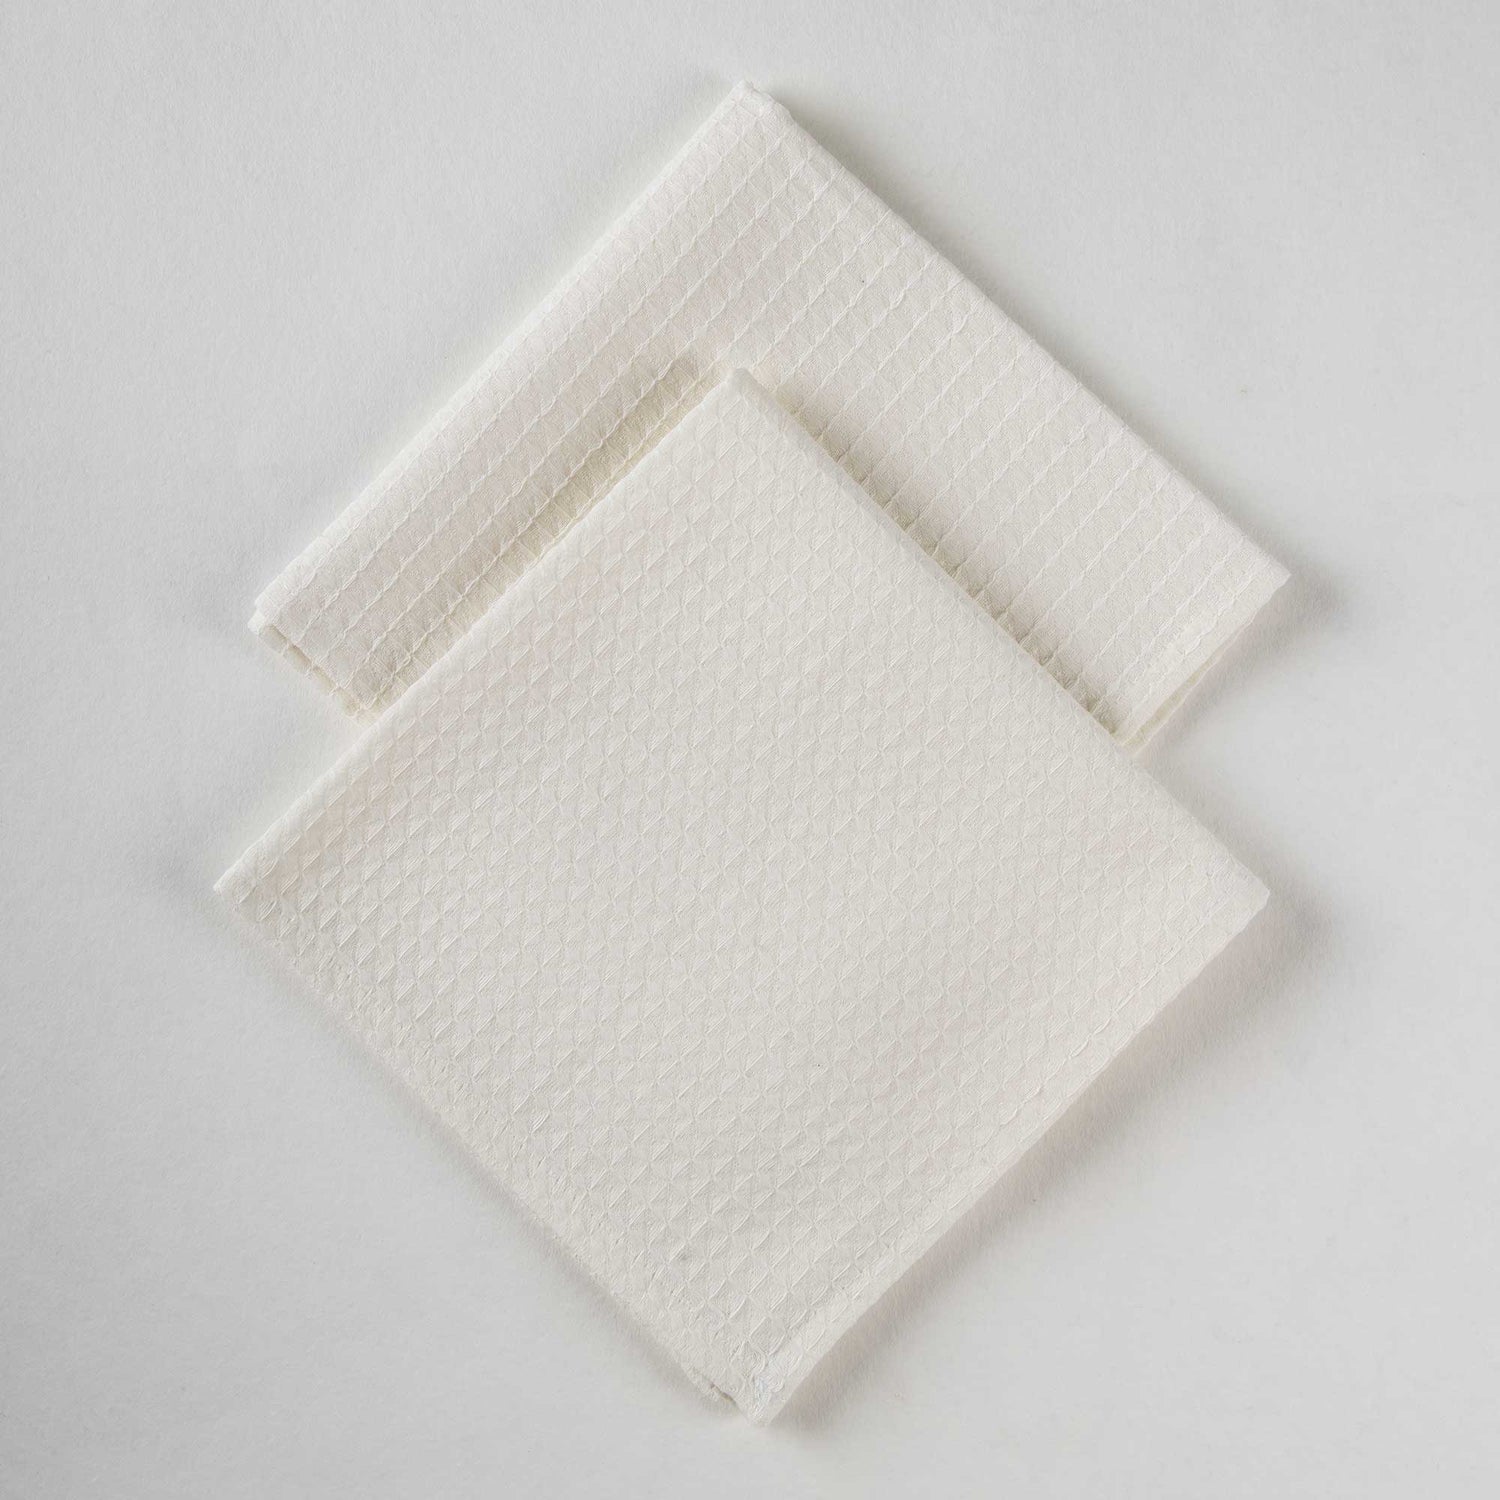 White Soft Fabric Towel and Quick Dry Towel Set